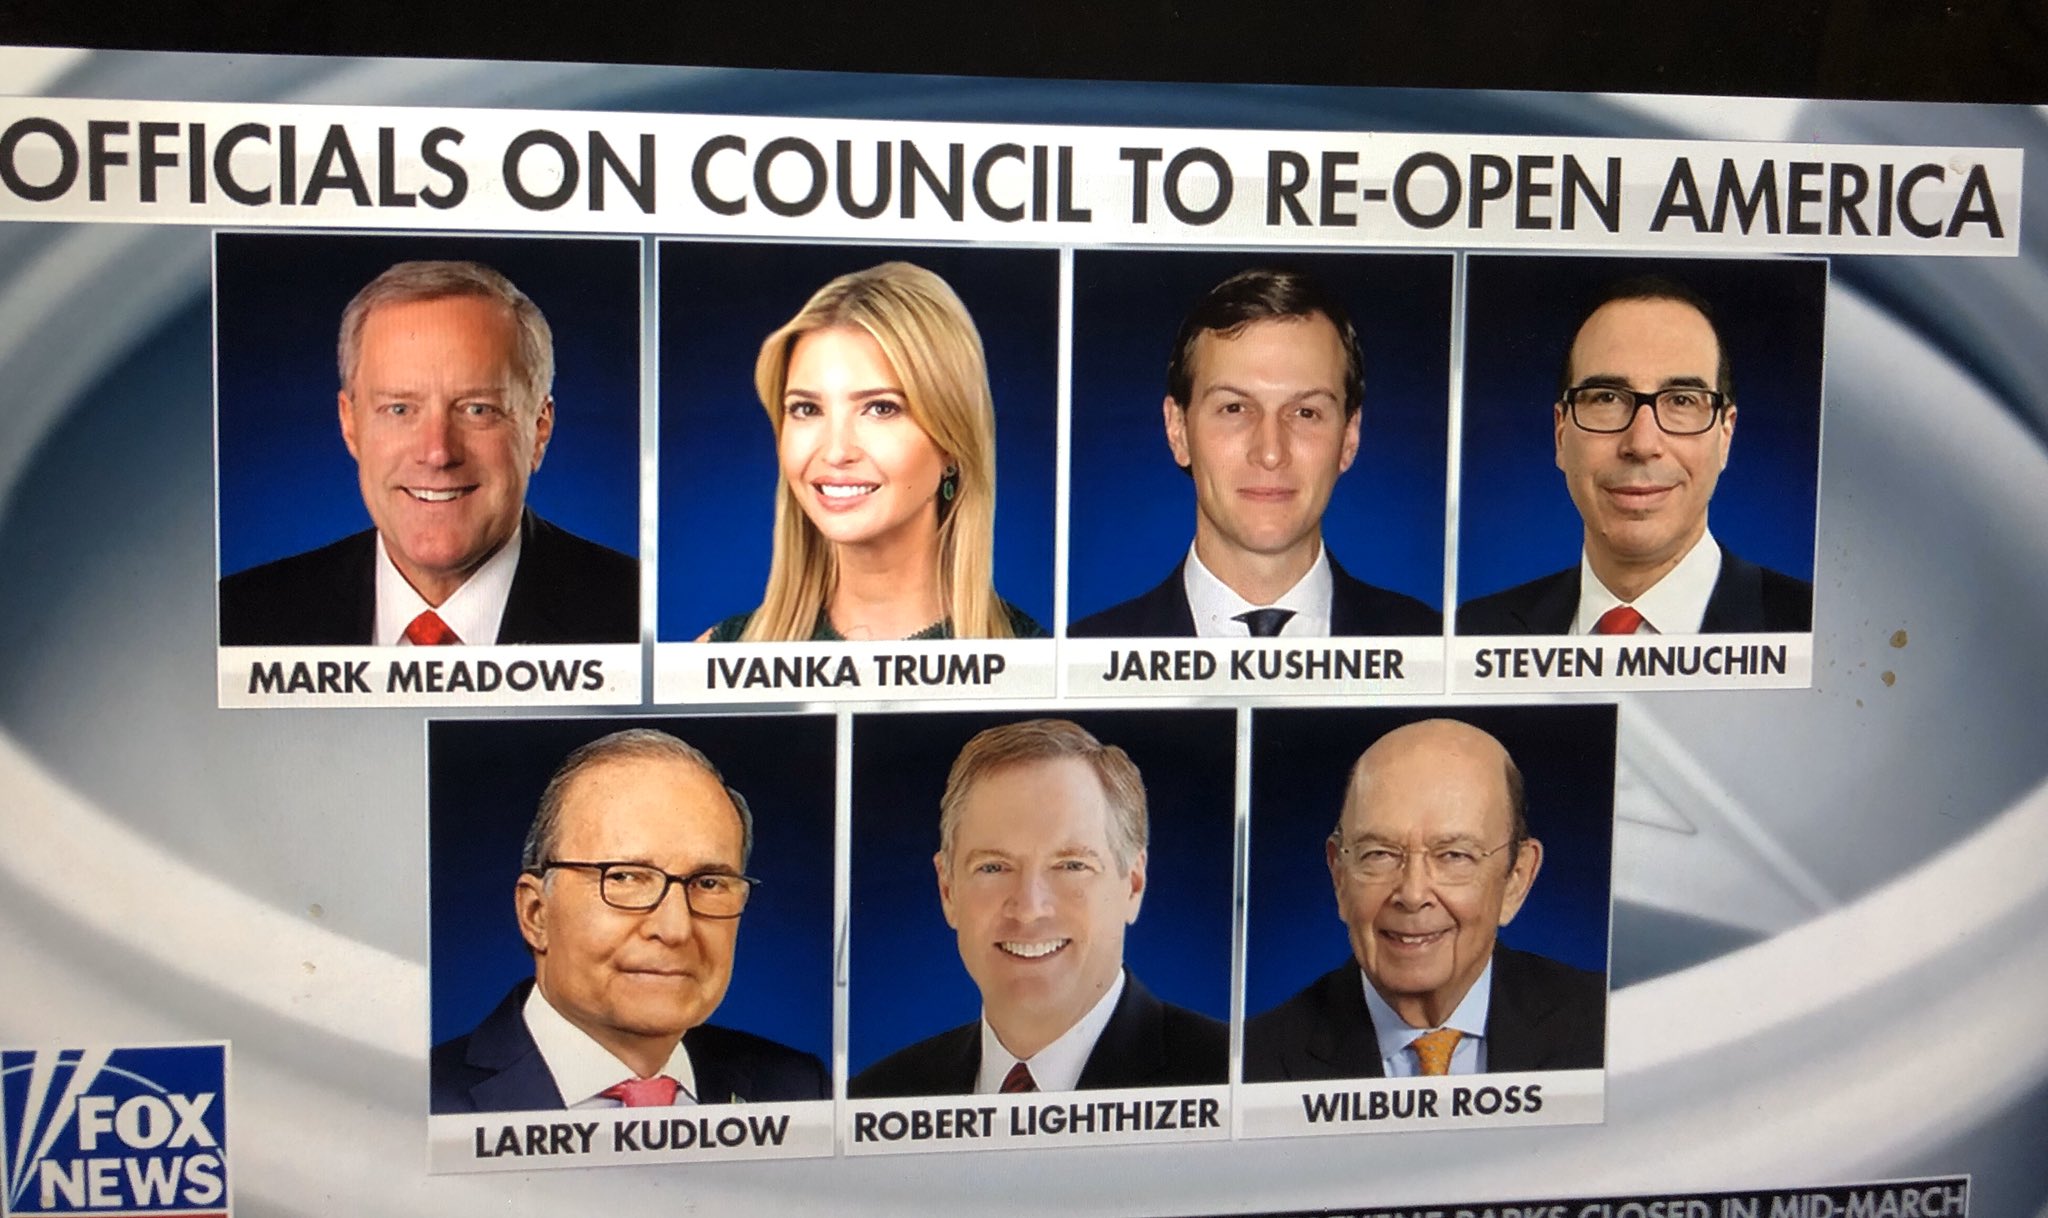 Meet Mr. Trump's council to reopen America.